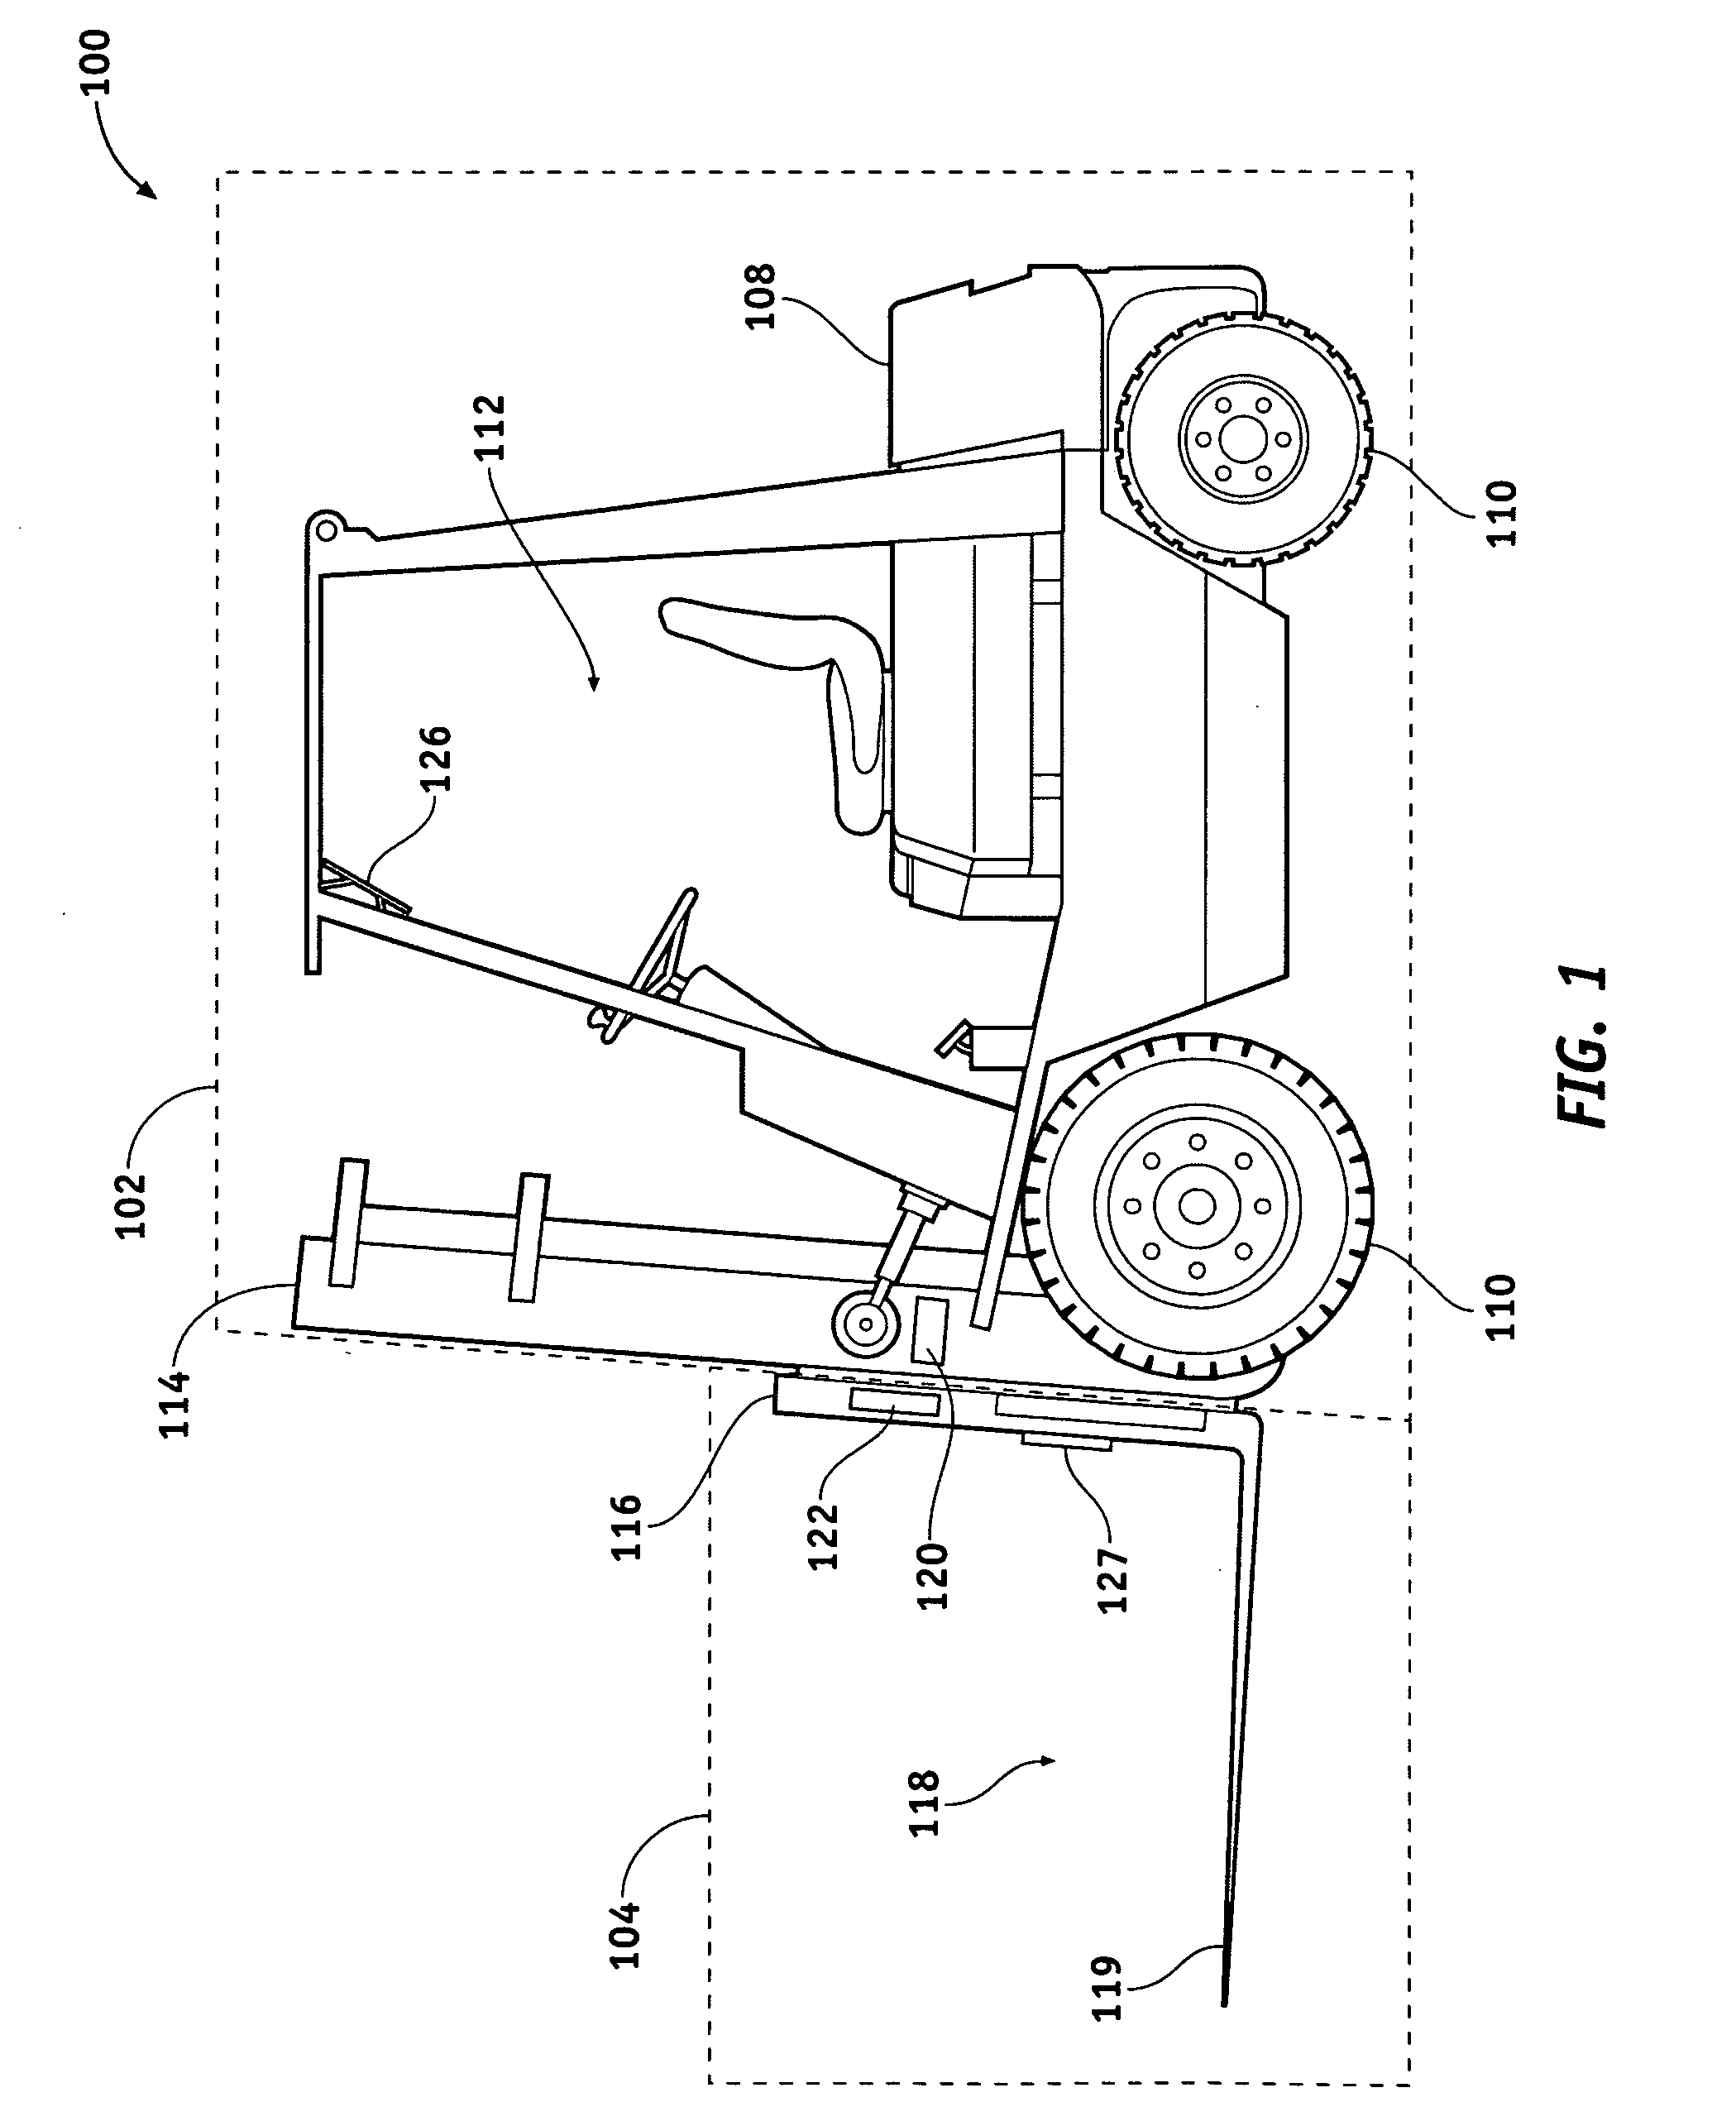 Inventory transport device with integrated RFID reader